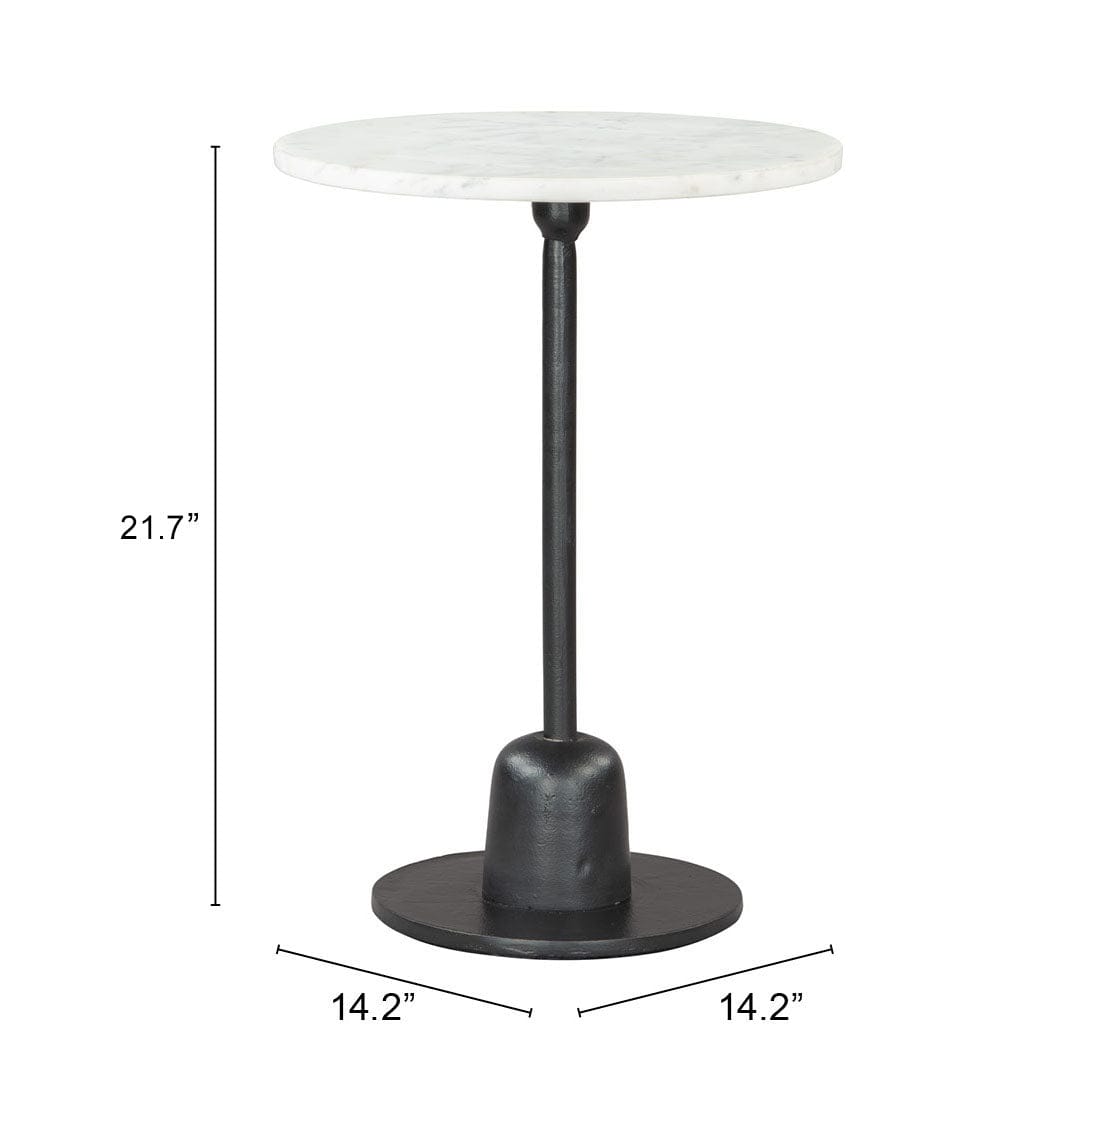 Measurements of Whammy Table